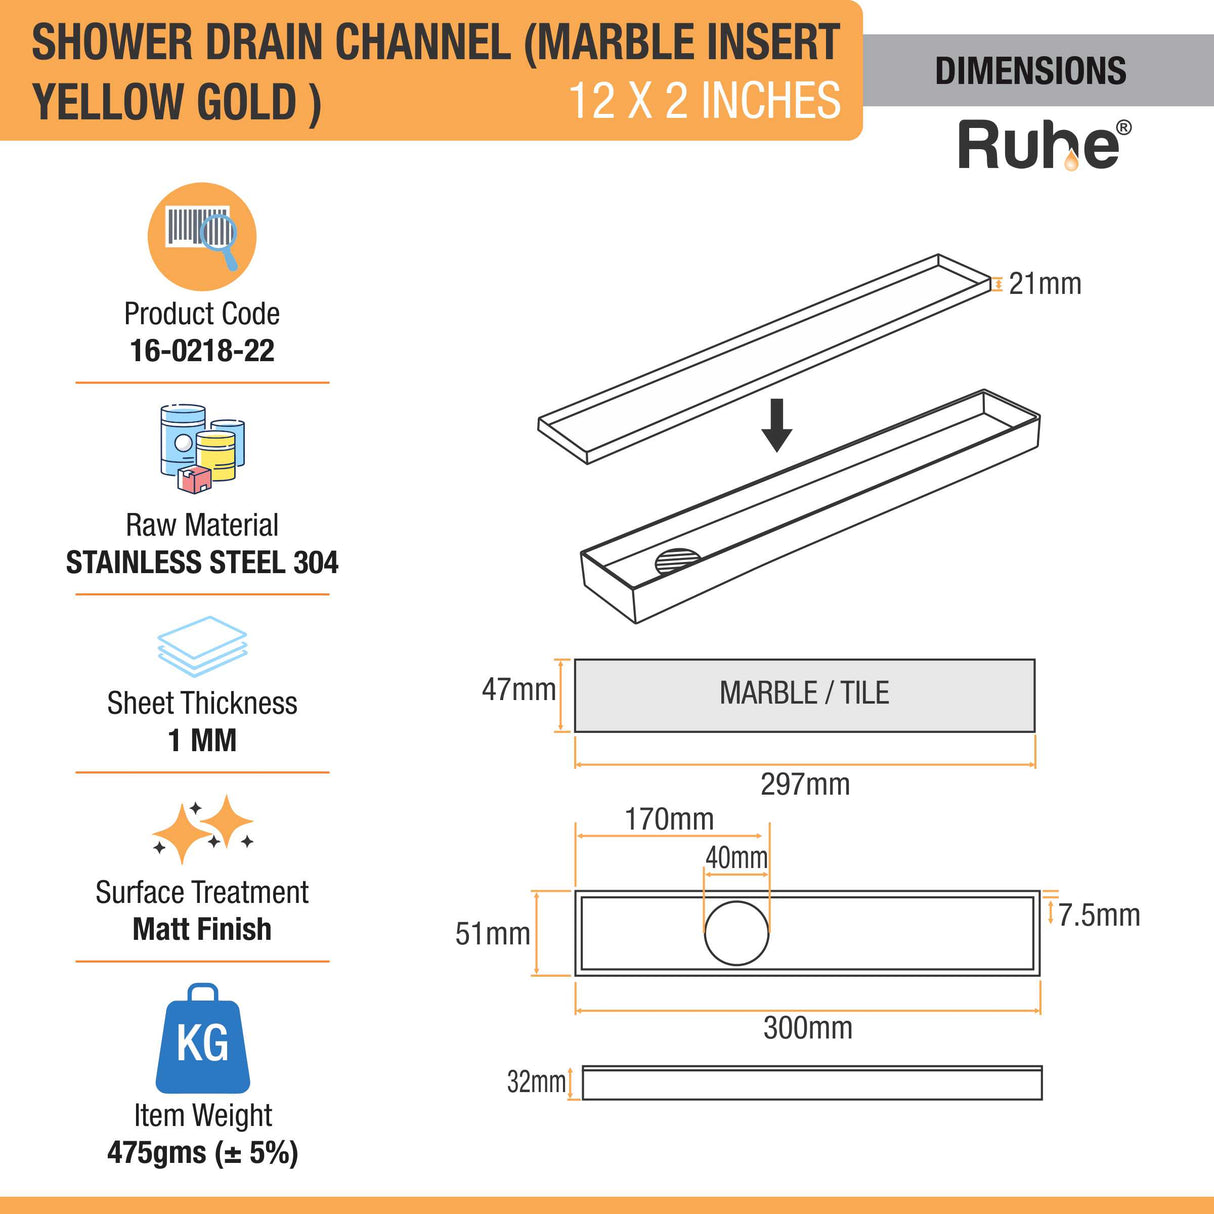 Marble Insert Shower Drain Channel (12 x 2 Inches) YELLOW GOLD dimensions and size